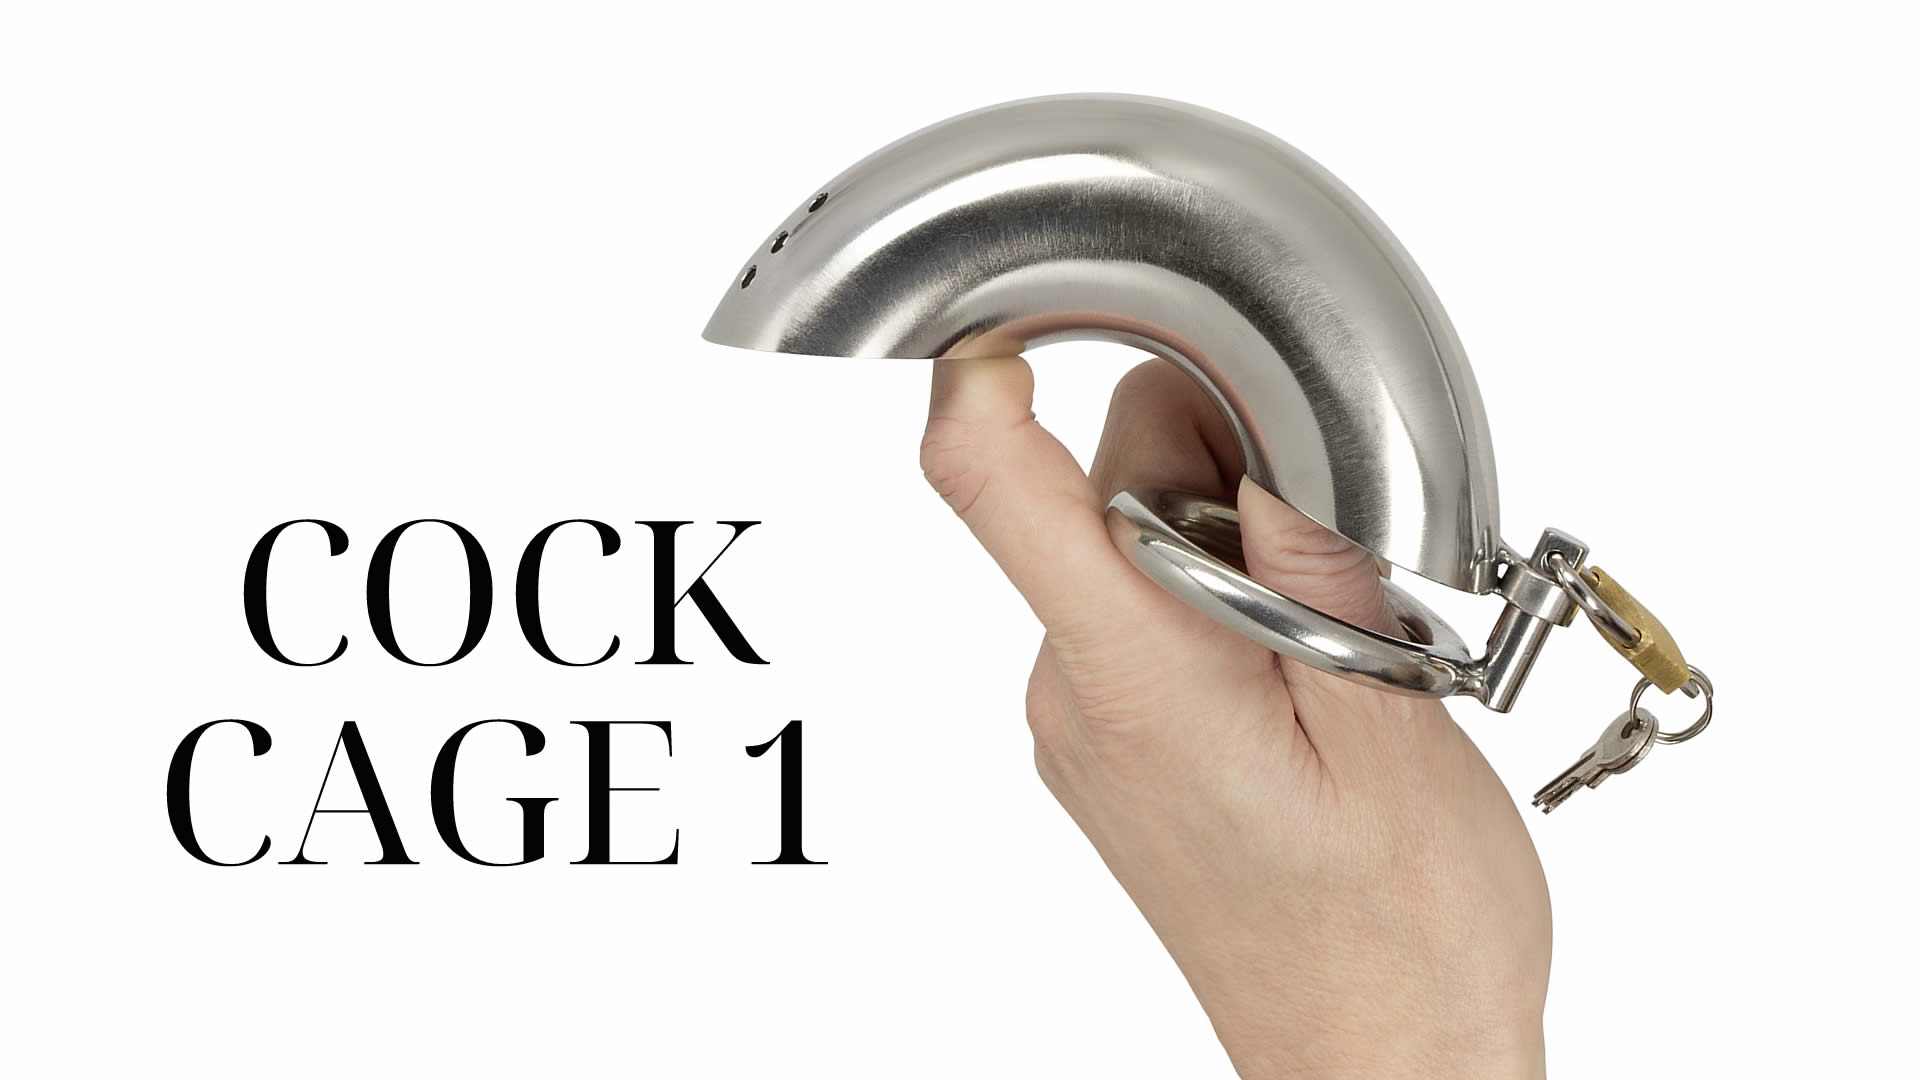 Peniskfig Chastity Cage Long aus Edelstahl